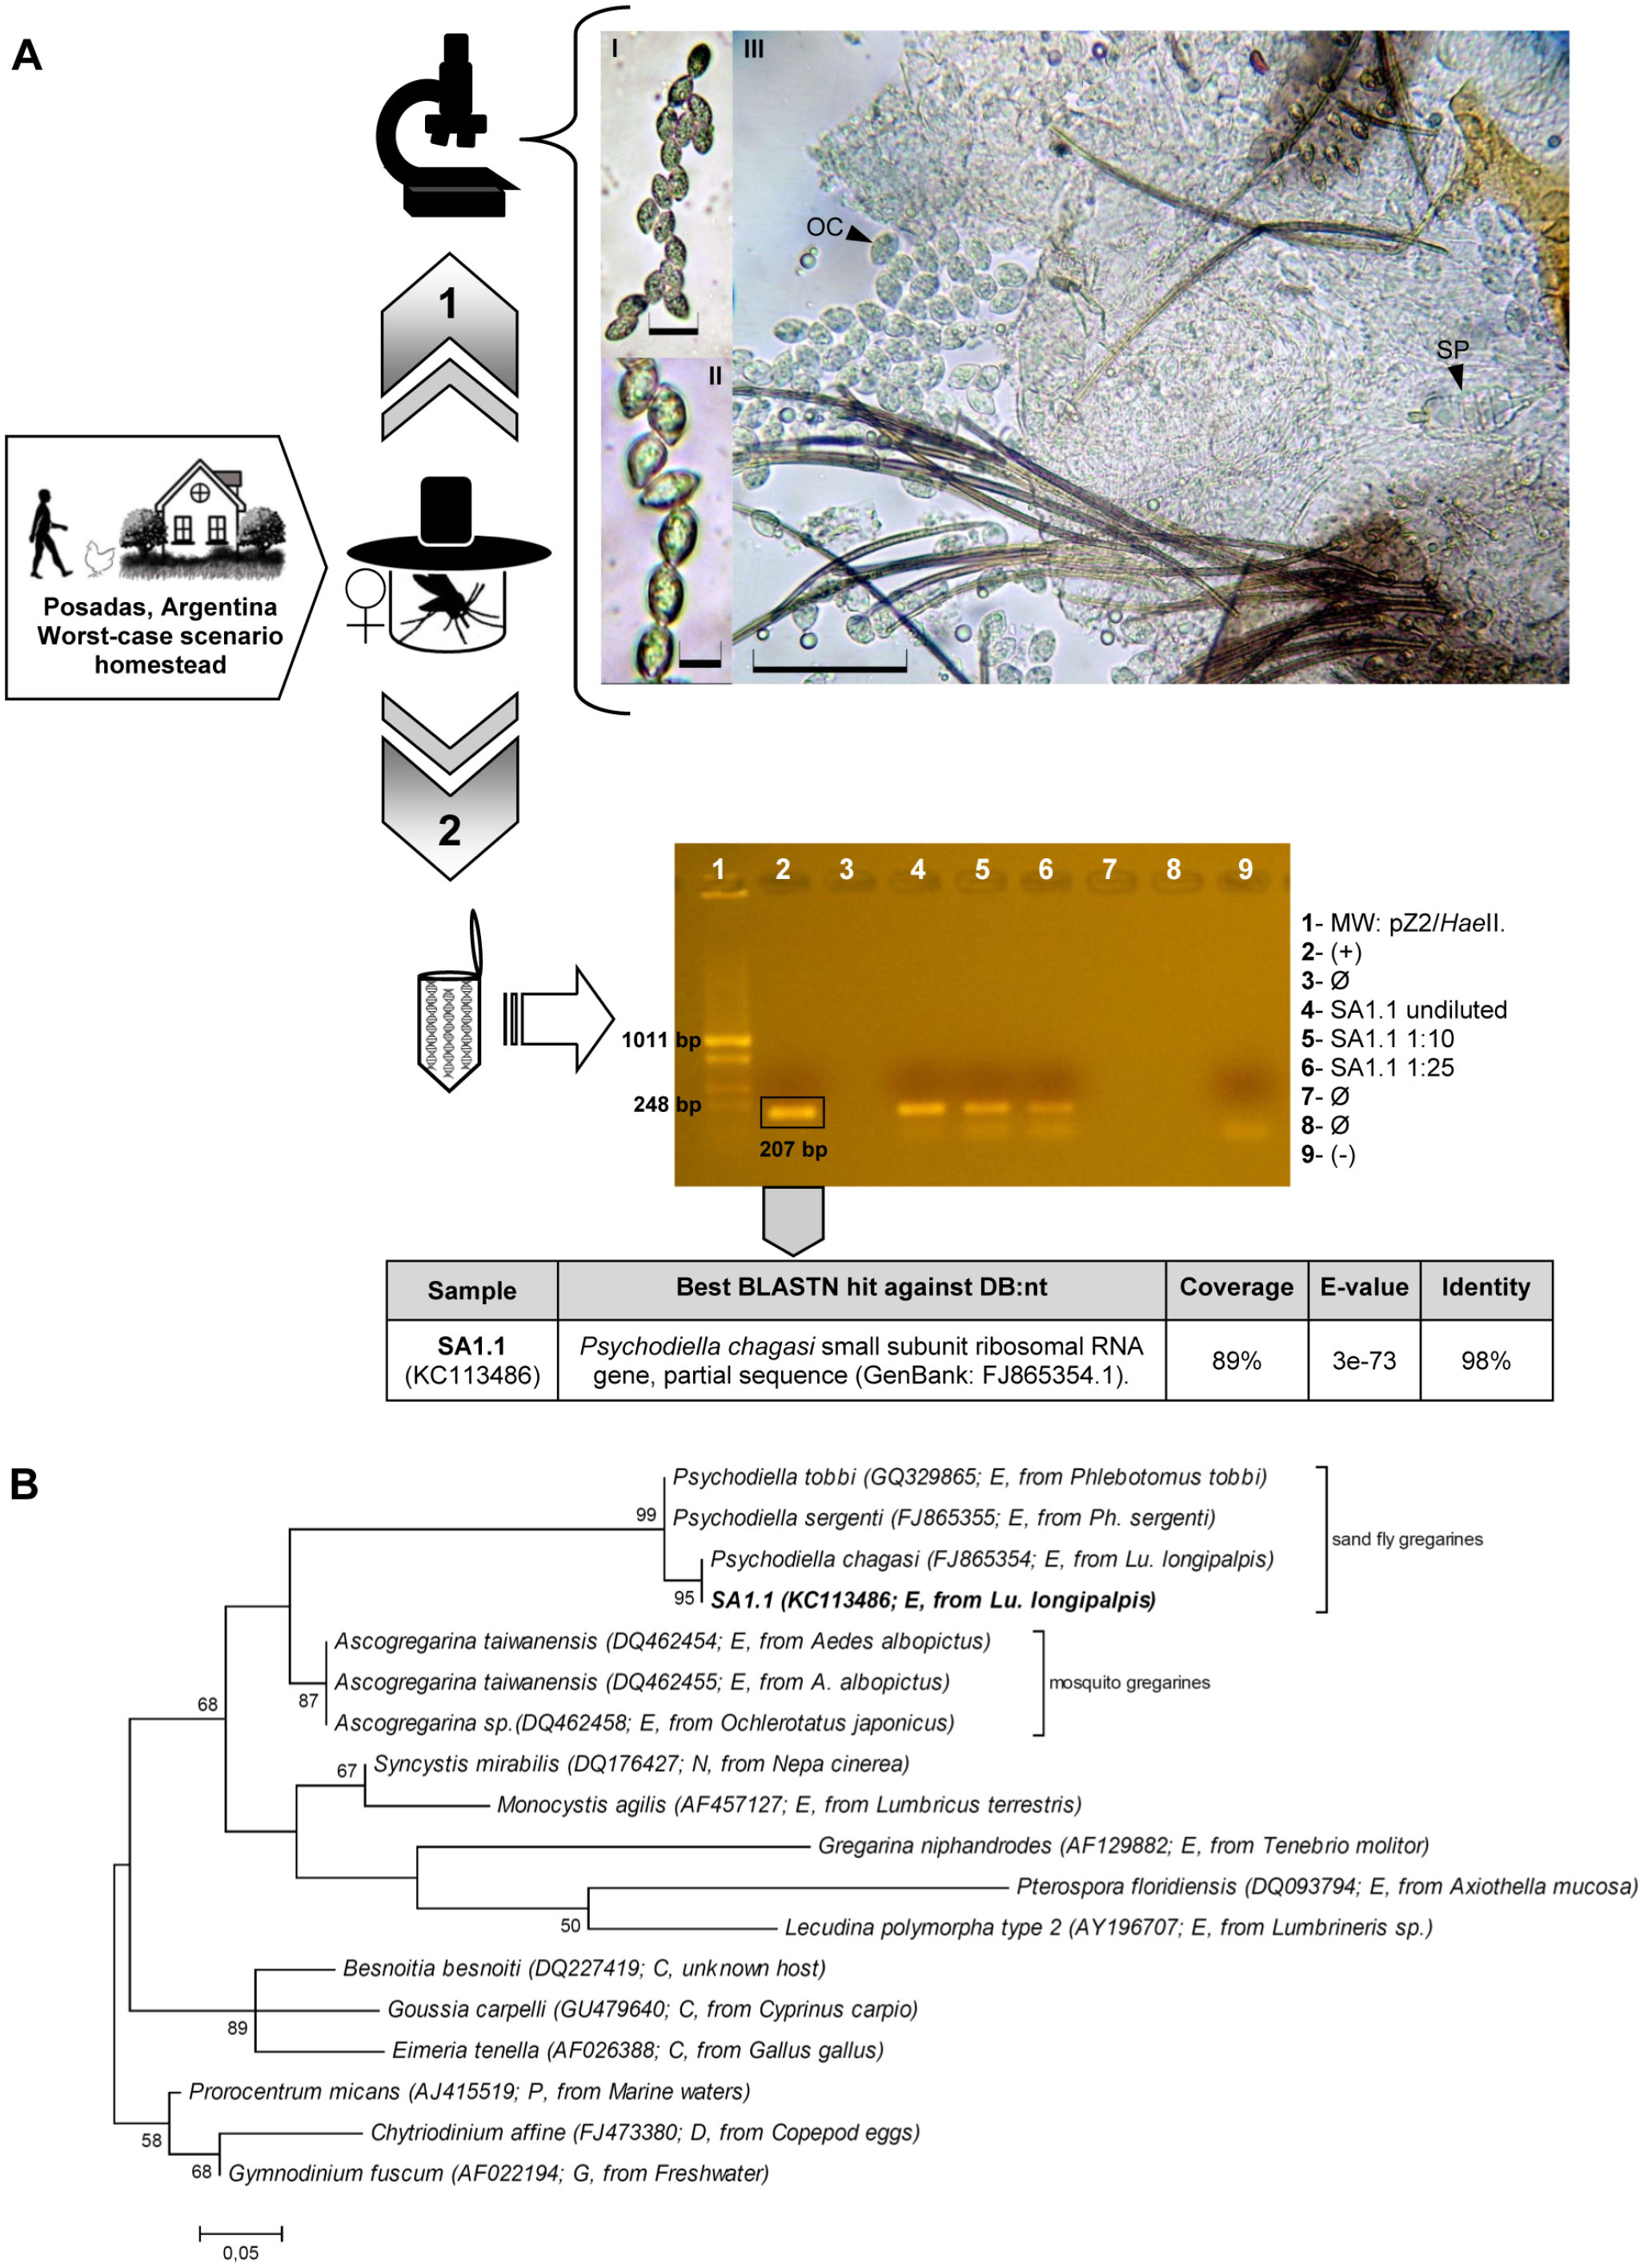 Polymerase Chain Reaction Based Assay For The Detection And Identification Of Sand Fly Gregarines In Lutzomyia Longipalpis A Vector Of Visceral Leishmaniasis